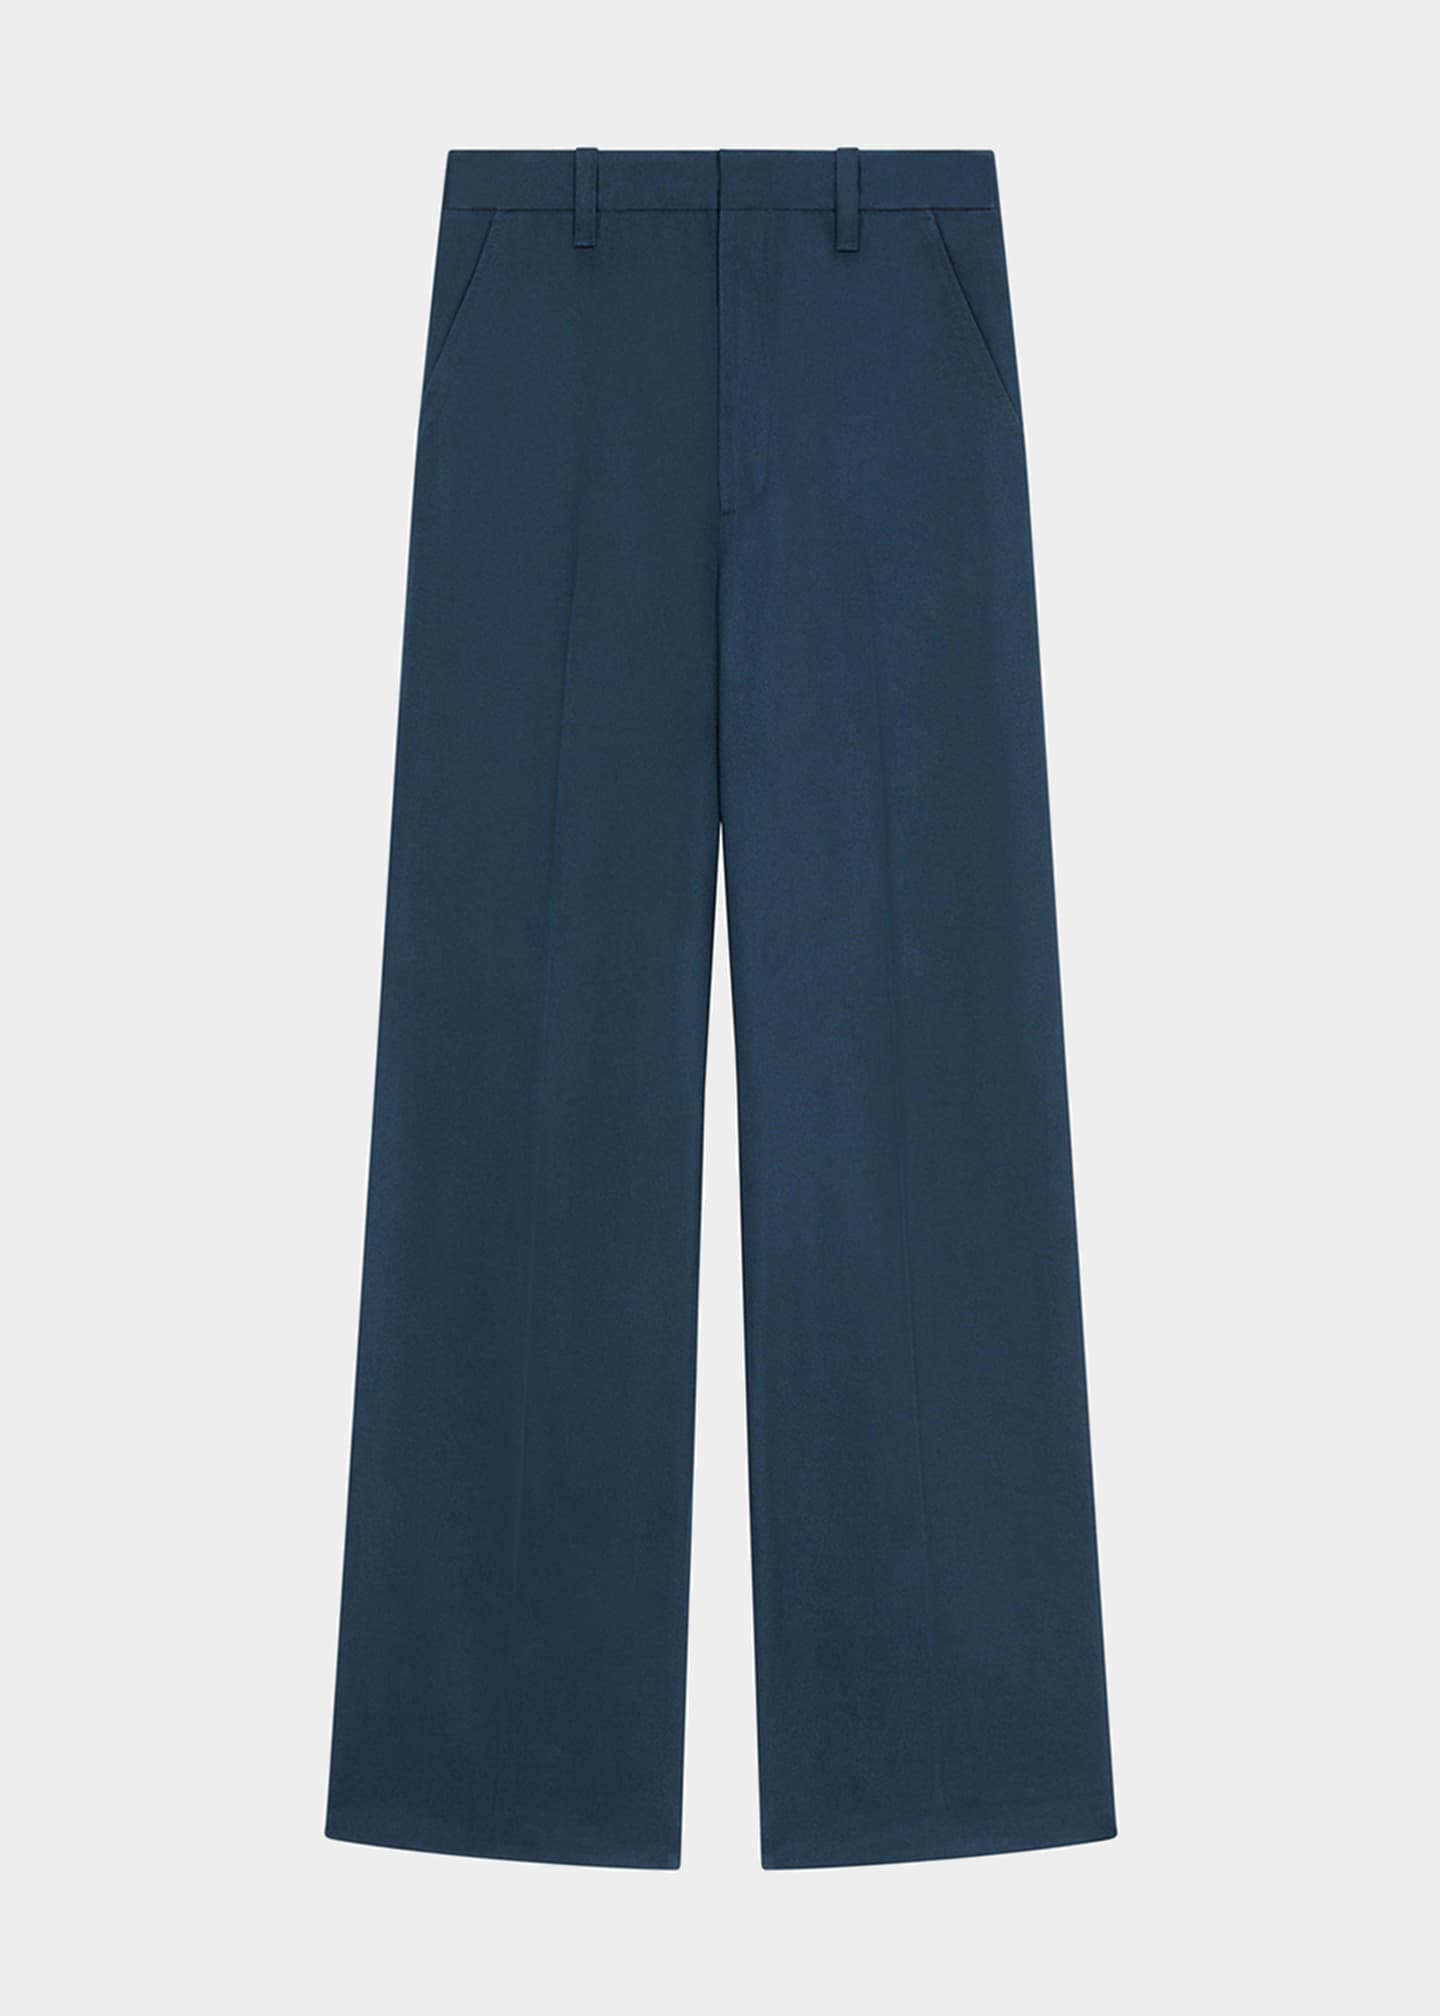 Kenzo Men's Relaxed-Fit Trousers - Bergdorf Goodman